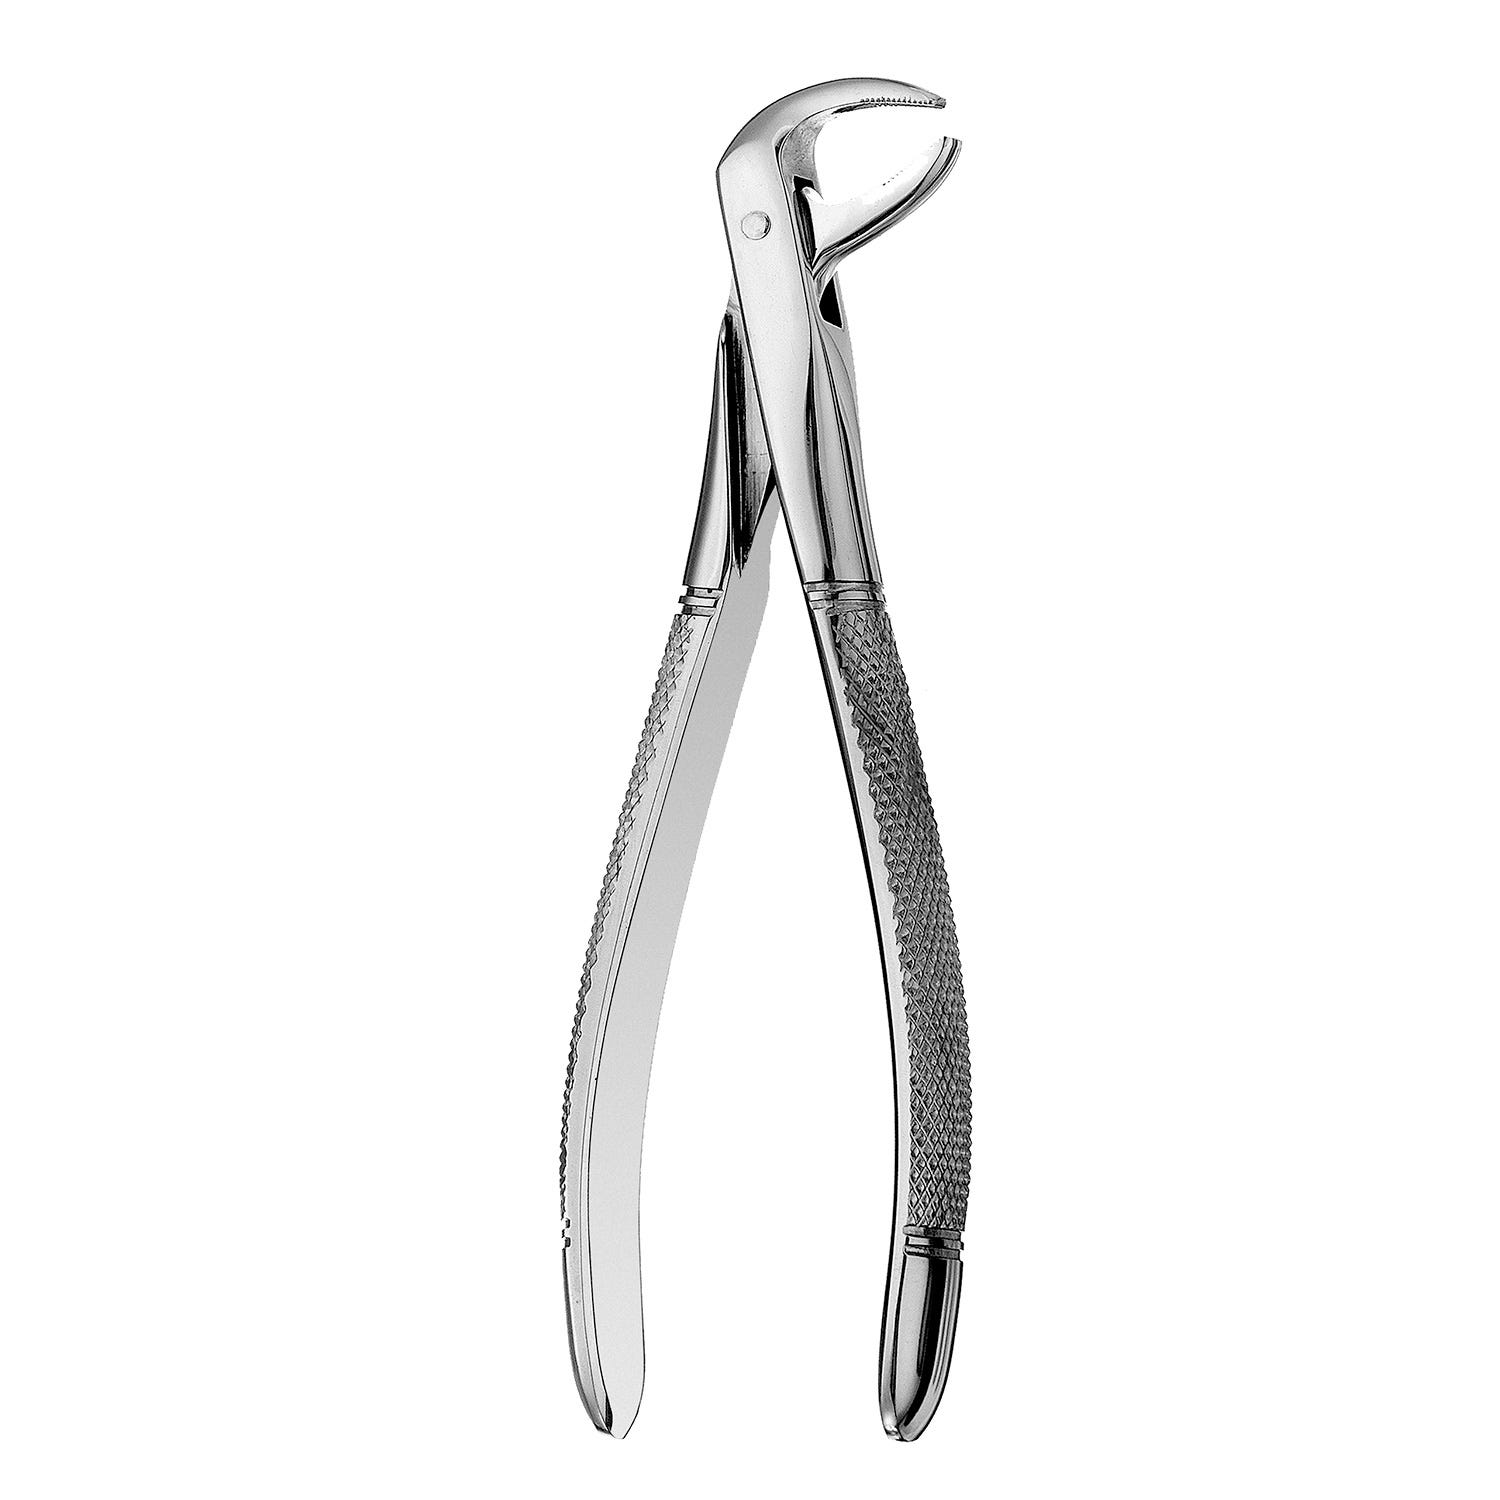 Forcep Lower Root #FX74 6" 15cm Serrated